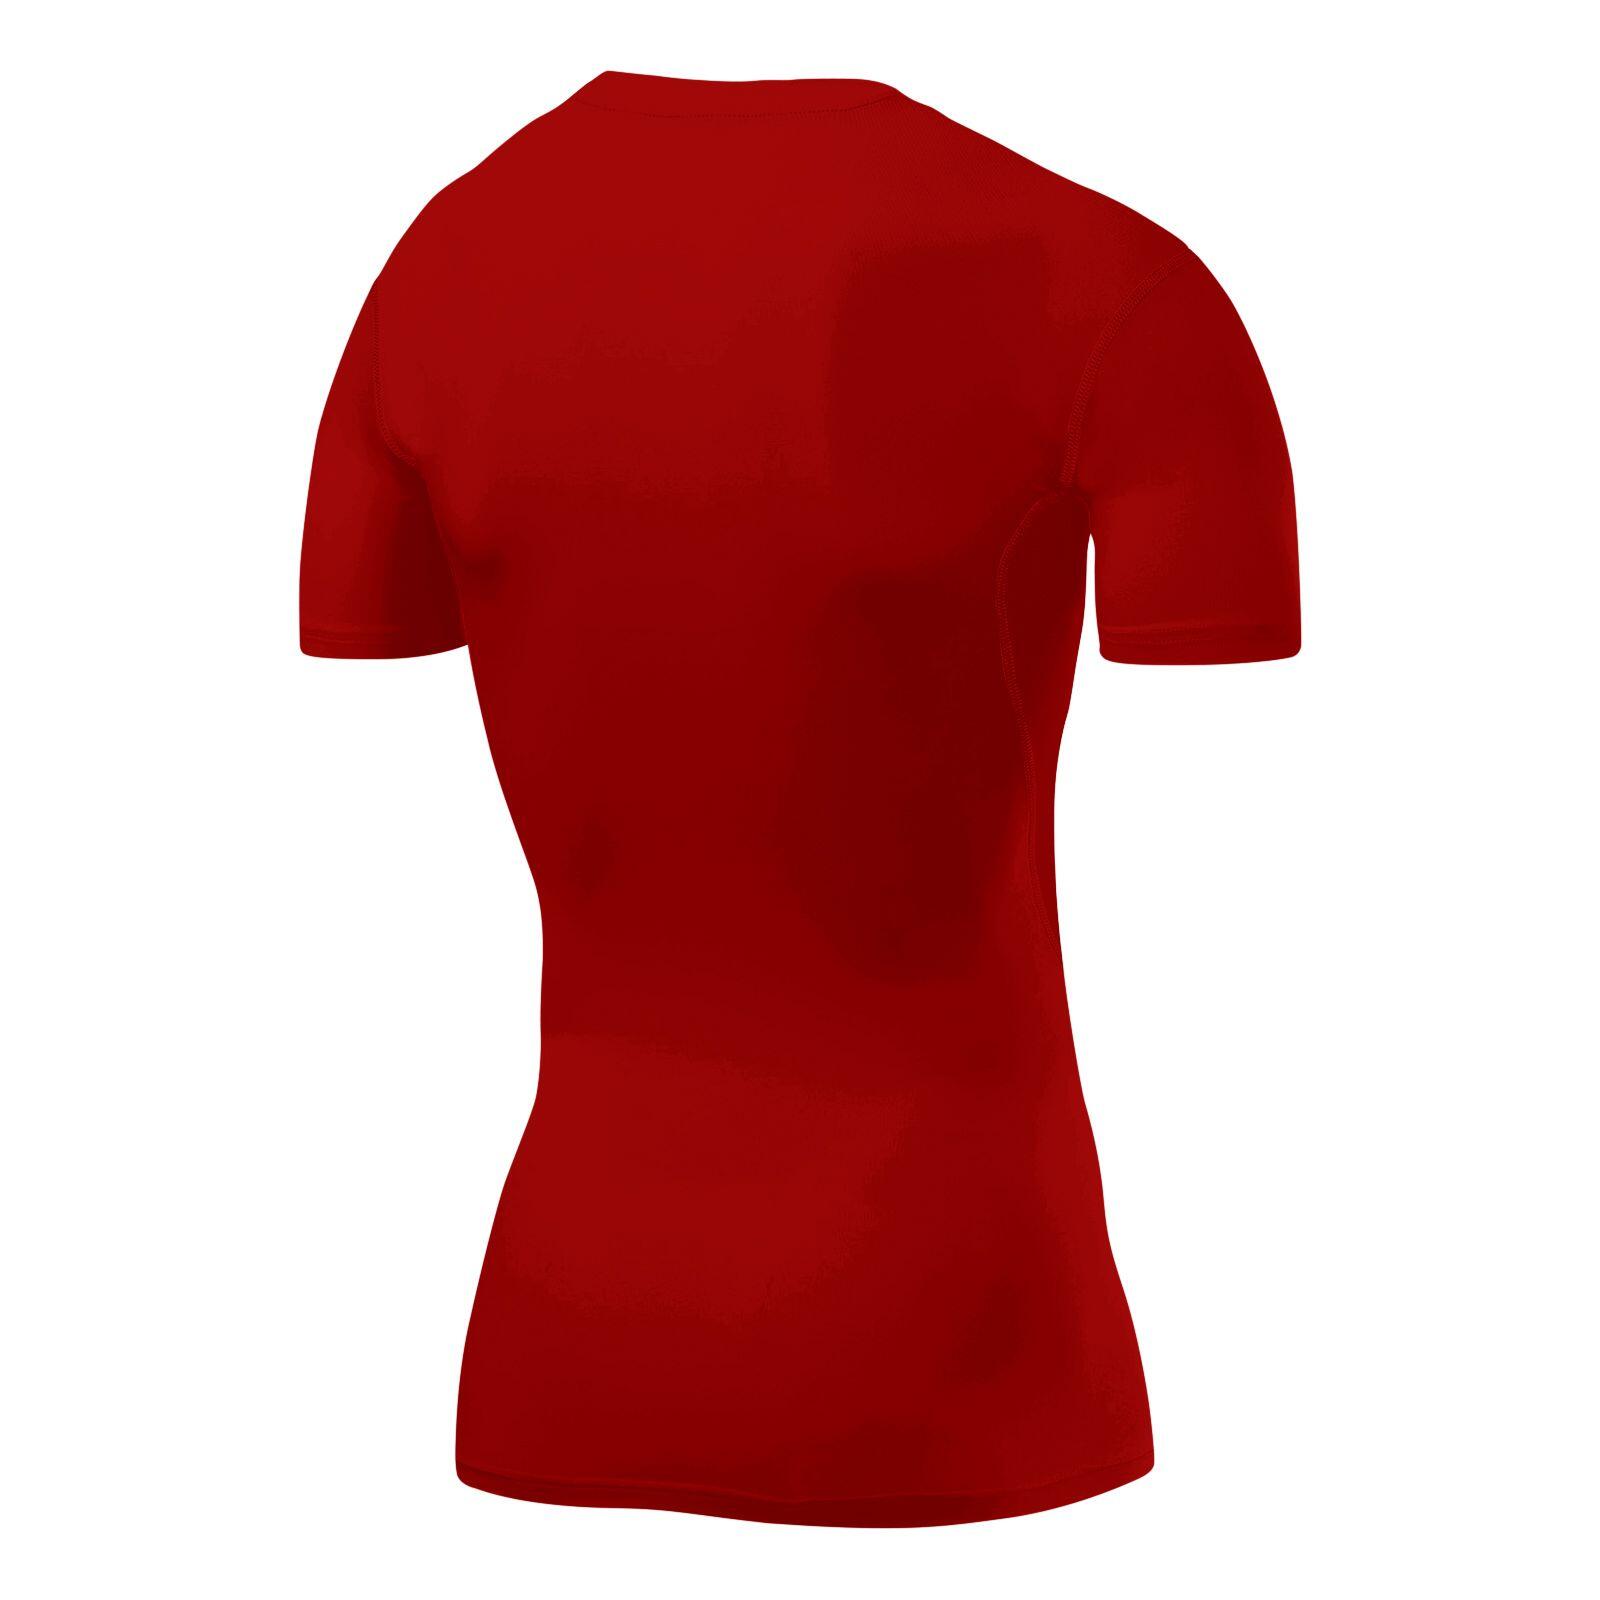 Men's HyperFusion Breathable Base Layer Compression T-shirt - High Risk Red 3/5